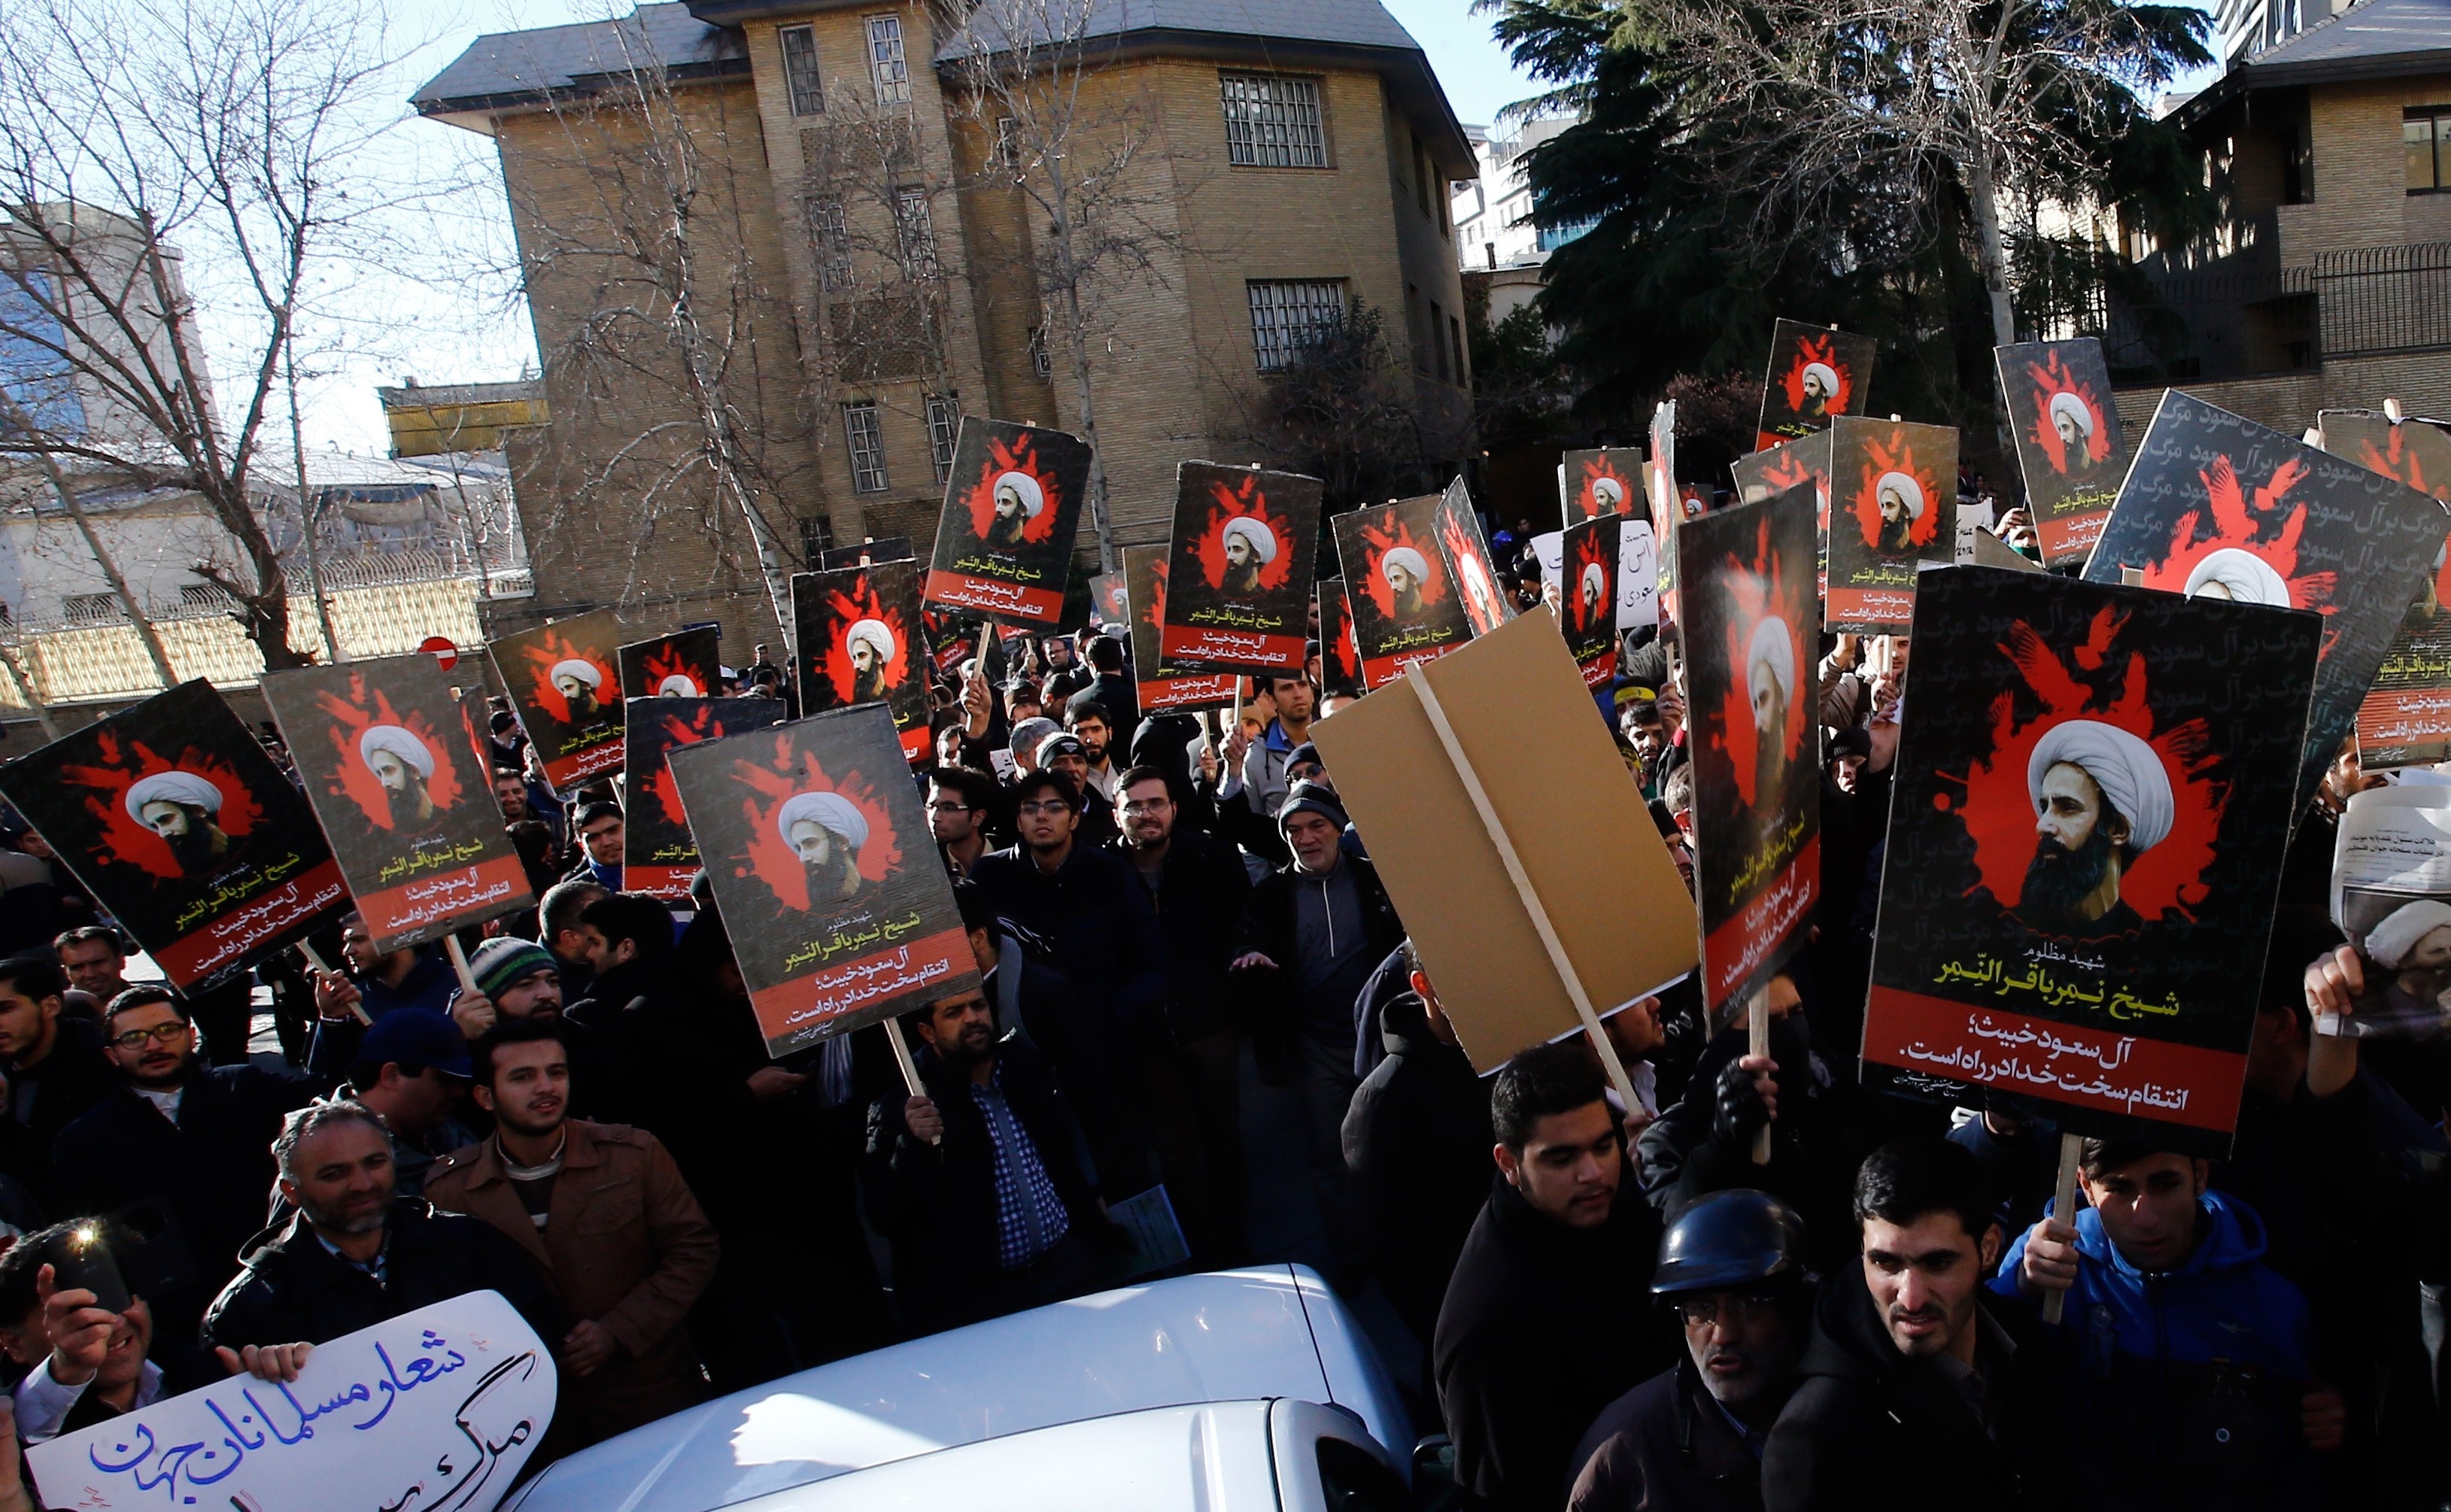 Demonstrators hold posters of Nimr Baqir al-Nimr and shout slogans during a protest rally outside the embassy of Saudi Arabia against the execution of prominent Saudi Shia cleric Nimr Baqir al-Nimr by Saudi authorities, in Tehran, Iran on Jan. 3 2016.